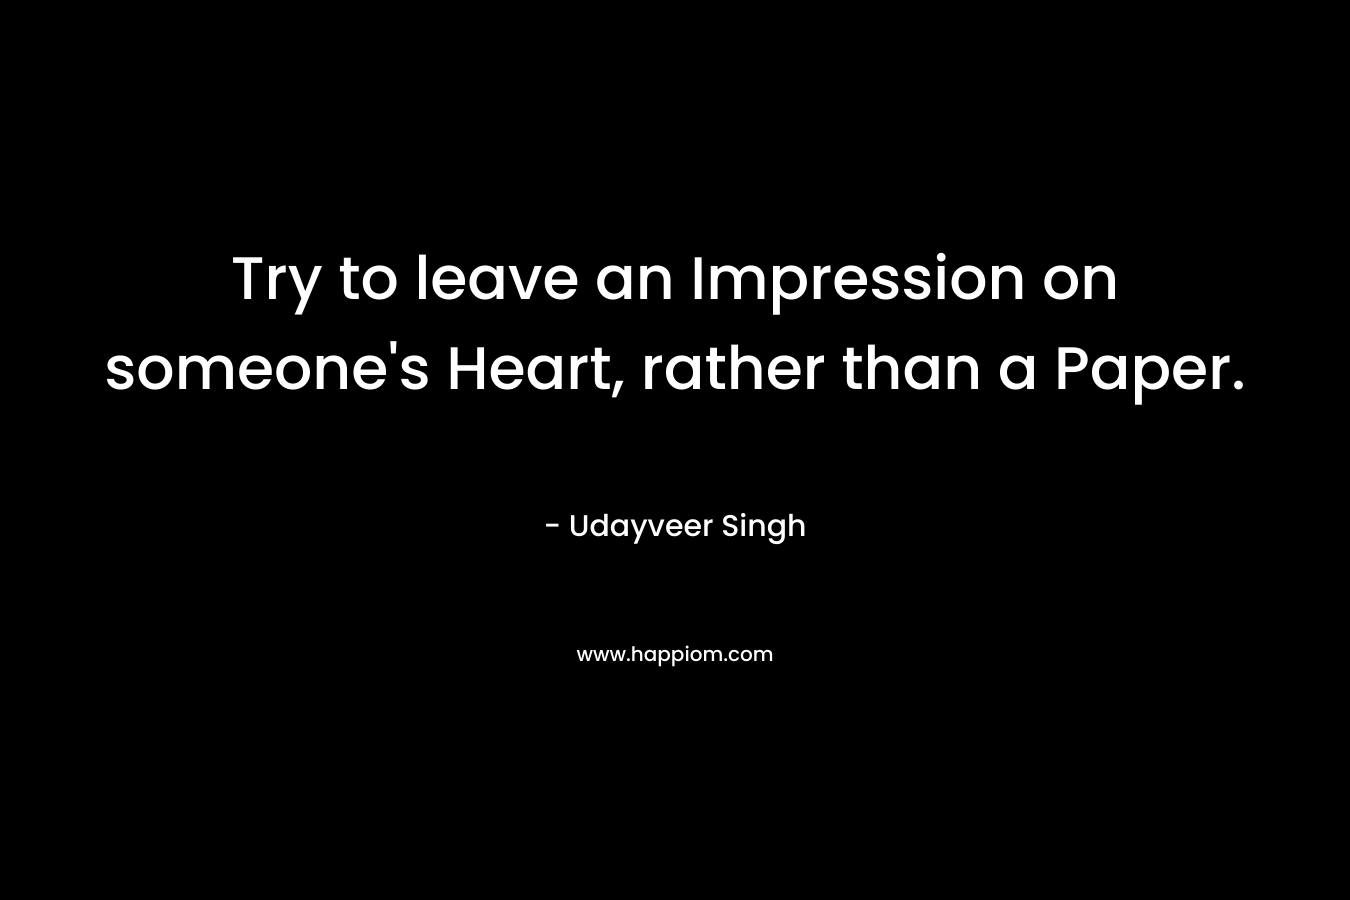 Try to leave an Impression on someone's Heart, rather than a Paper.